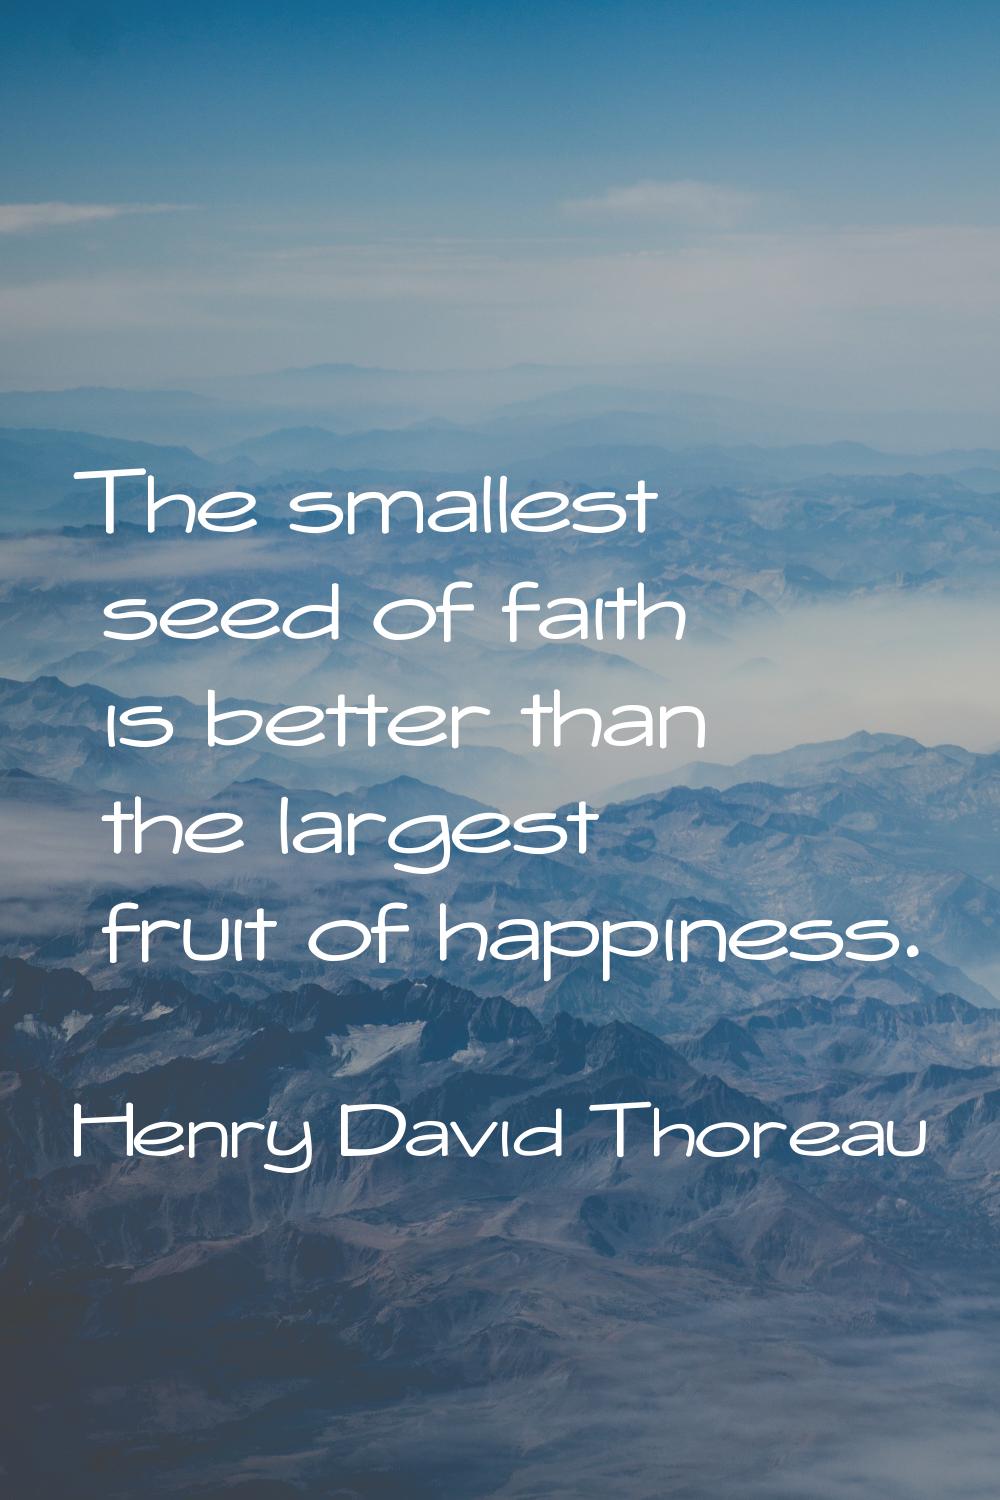 The smallest seed of faith is better than the largest fruit of happiness.